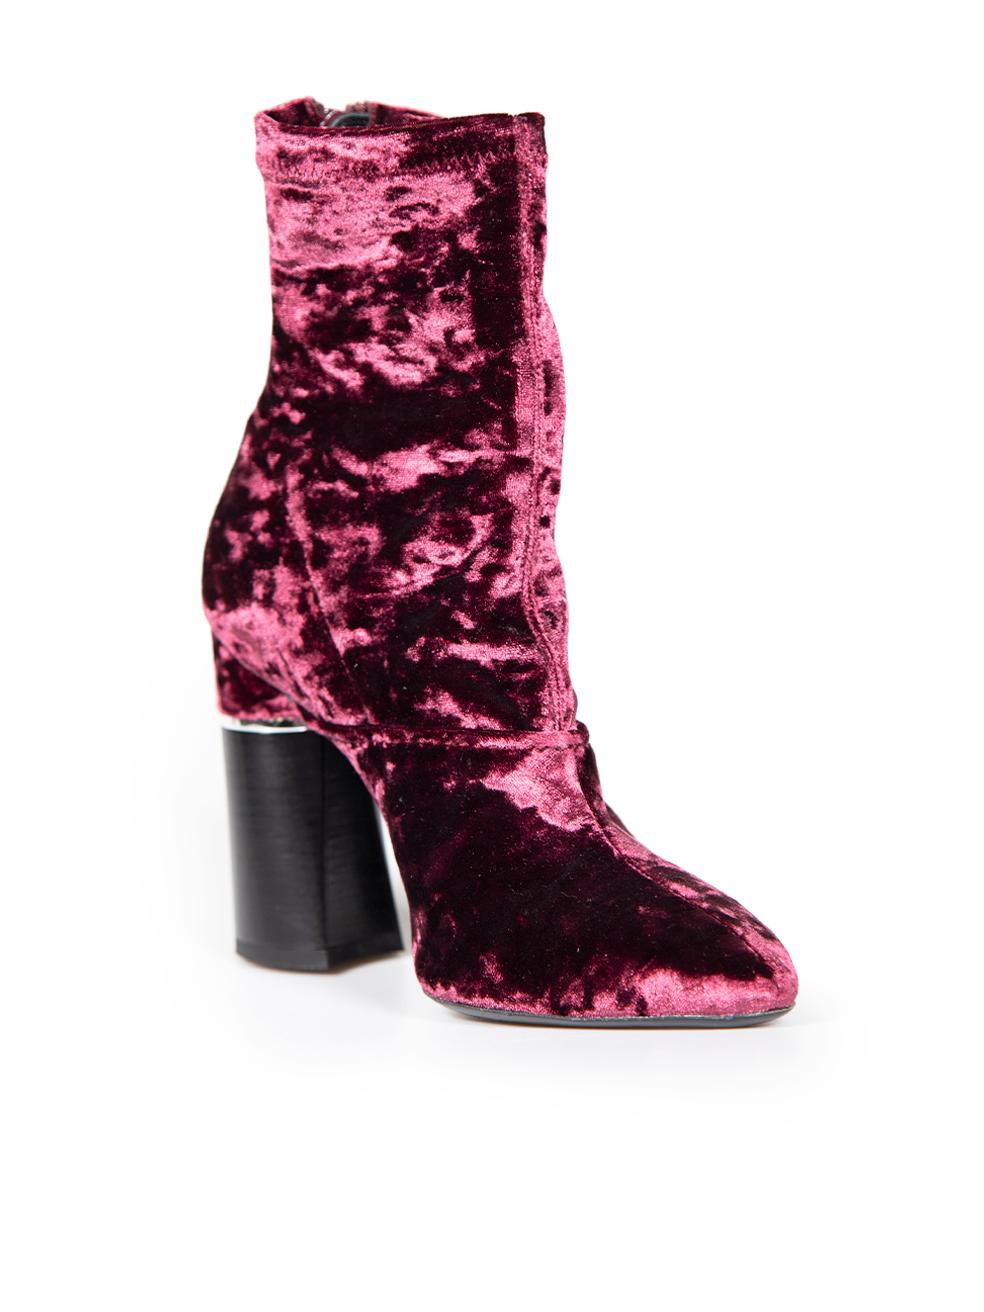 CONDITION is Very good. Minimal wear to boots is evident. Minimal wear to both boot heels with very light scratches on this used 3.1 Phillip Lim designer resale item.
 
 
 
 Details
 
 
 Purple
 
 Crushed velvet
 
 Ankle boots
 
 Point toe
 
 High